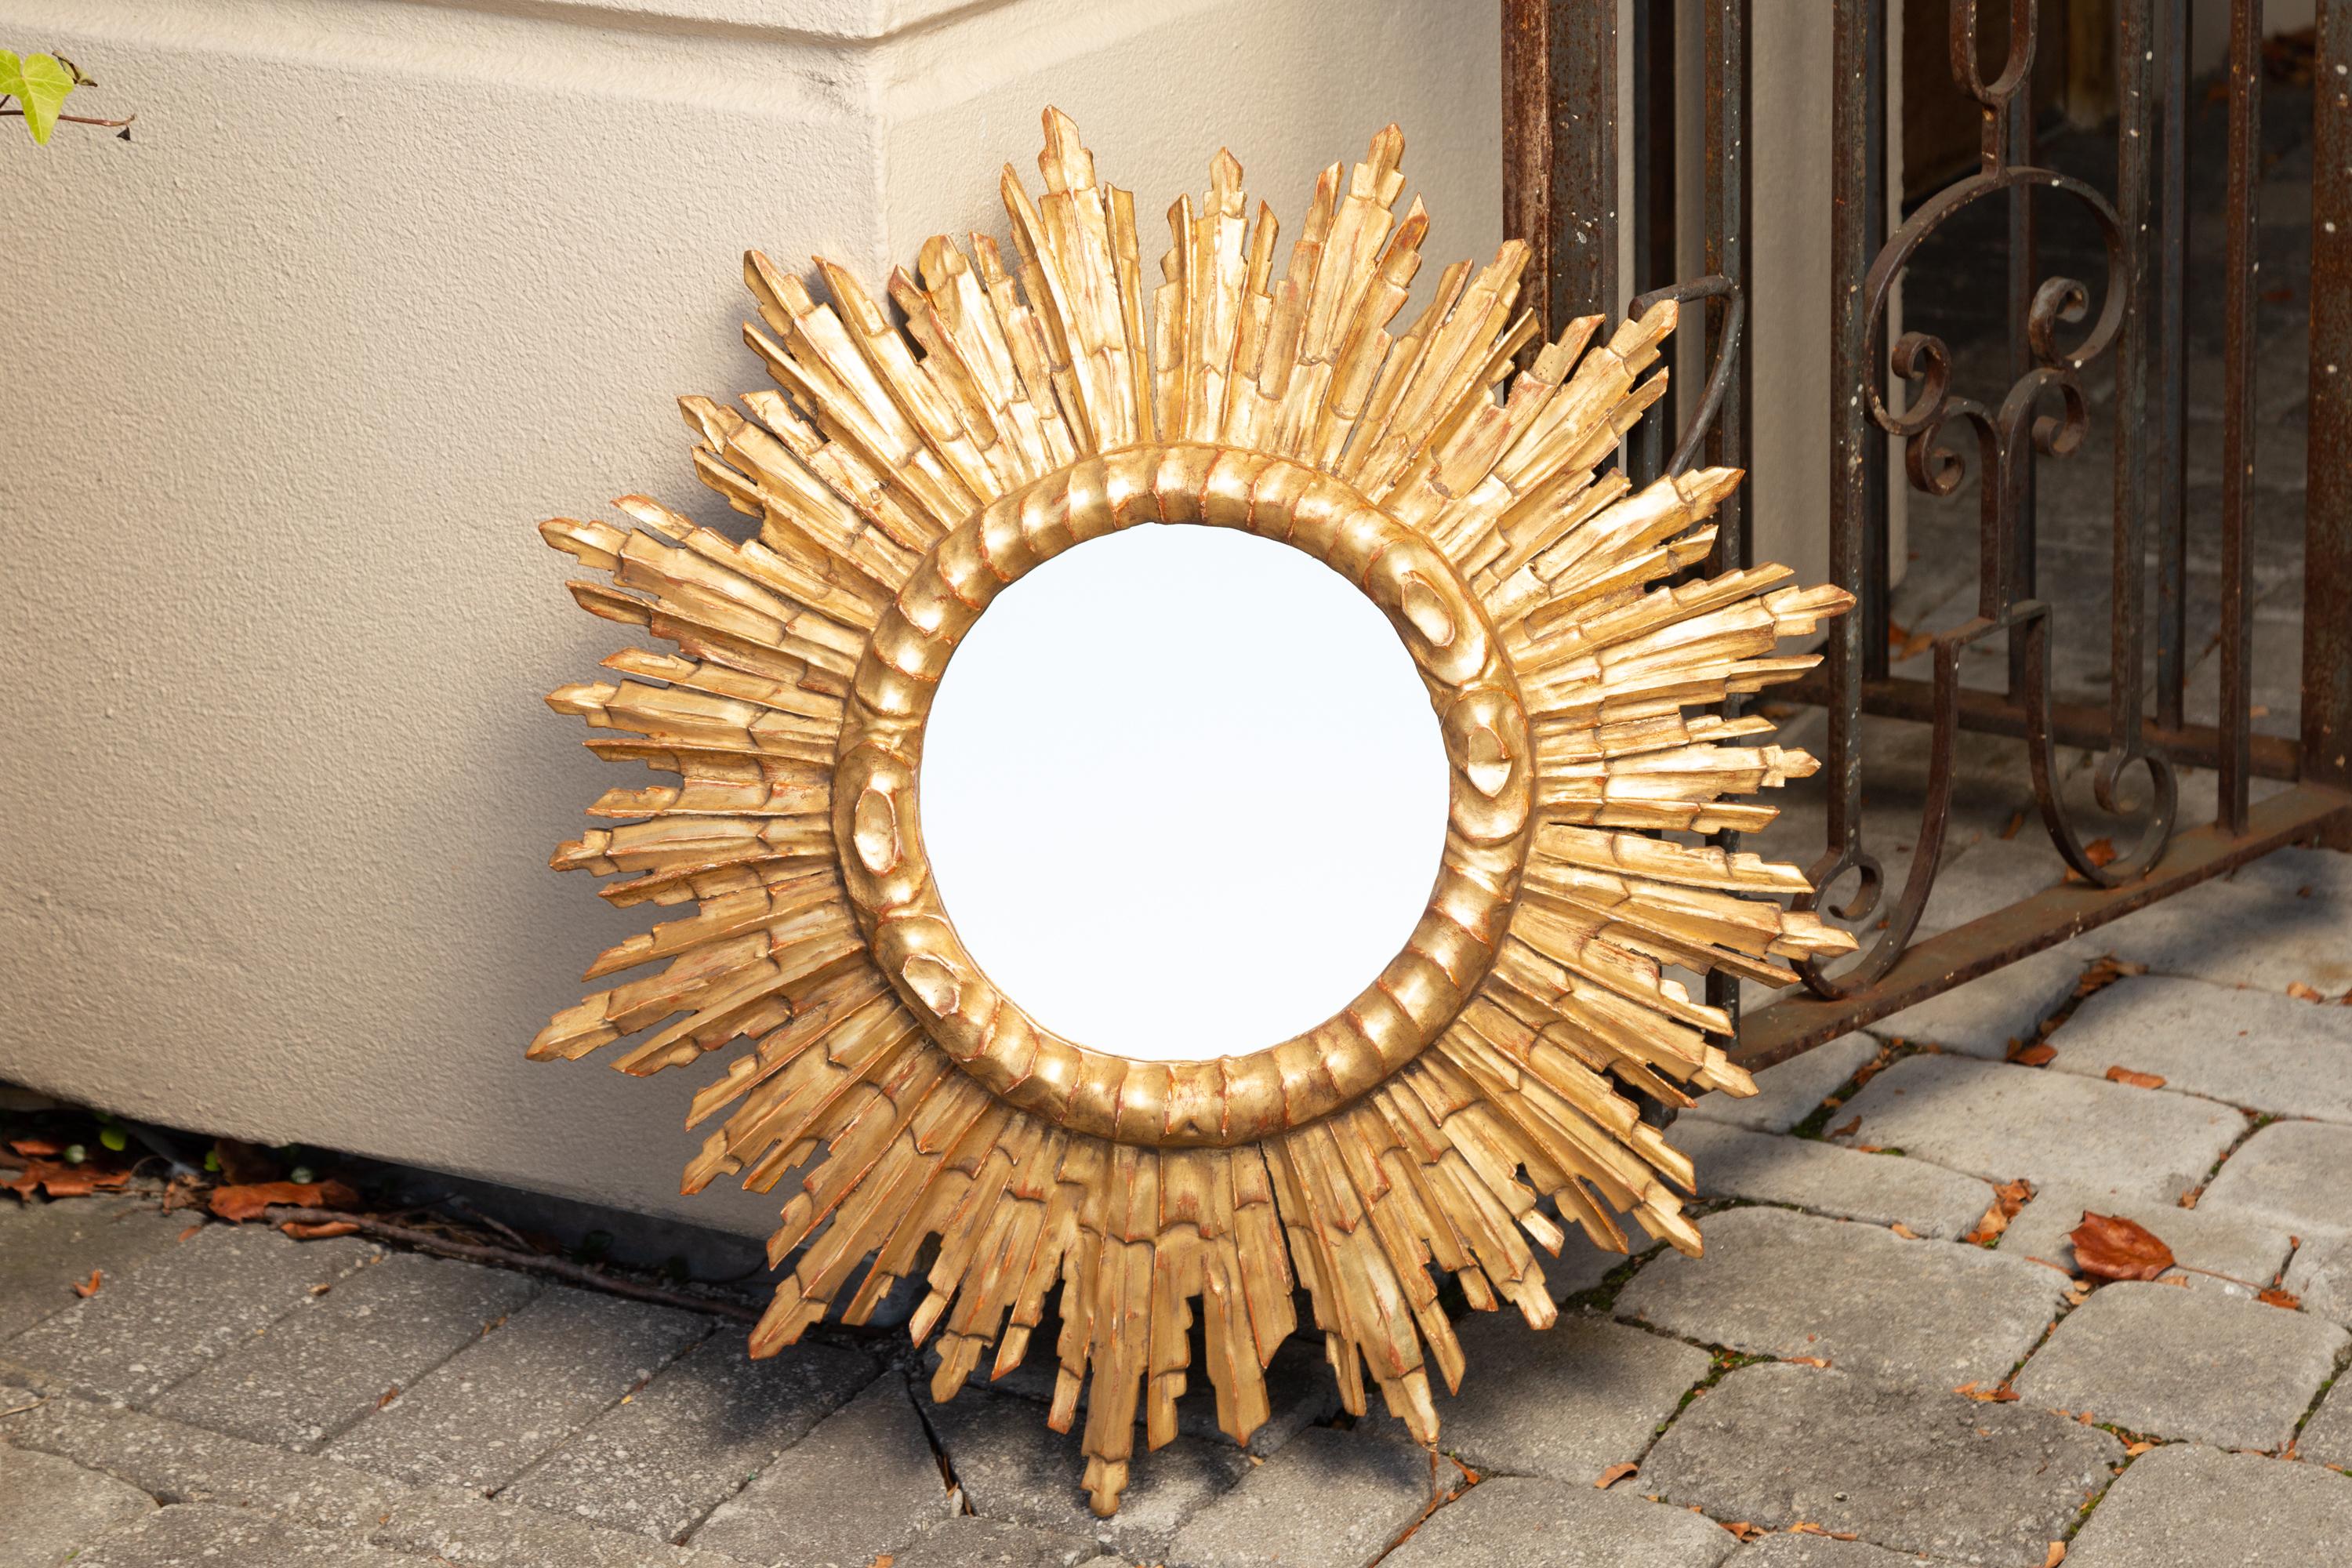 A French vintage giltwood sunburst mirror from the mid-20th century, with rays of varying sizes and cloudy frame. Born in France during the midcentury period, this exquisite sunburst mirror features a circular mirror plate surrounded by a cloudy